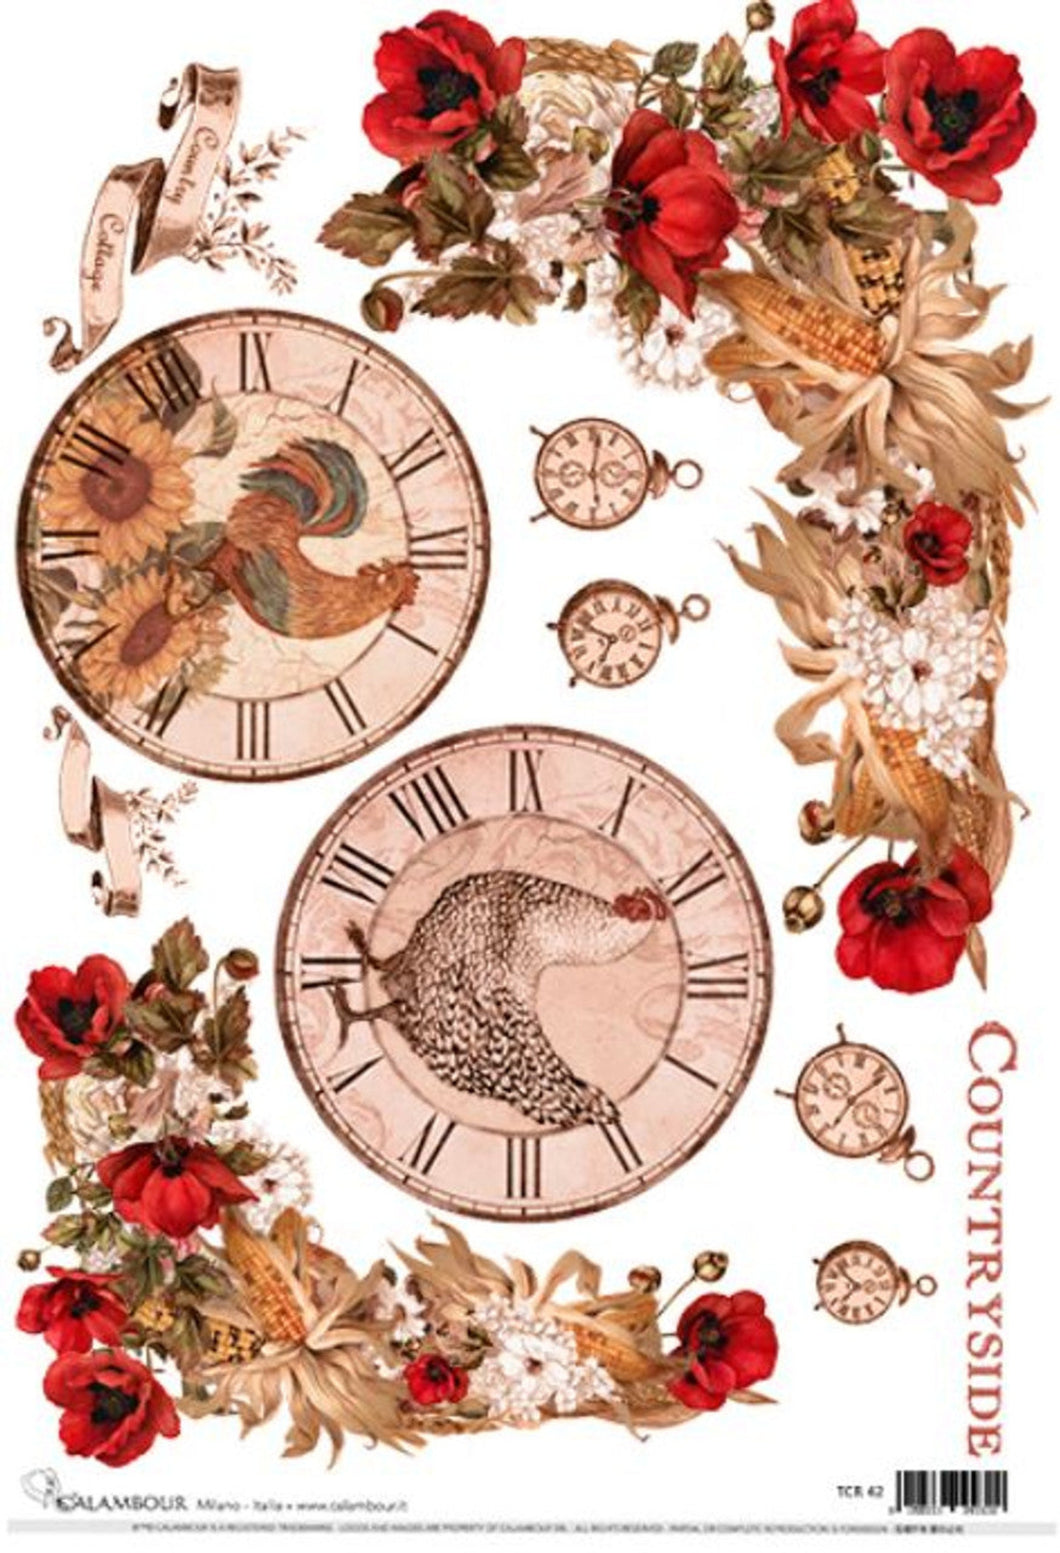 Countryside Poppies and Roosters Decoupage Rice Paper by Calambour Italy, TCR042